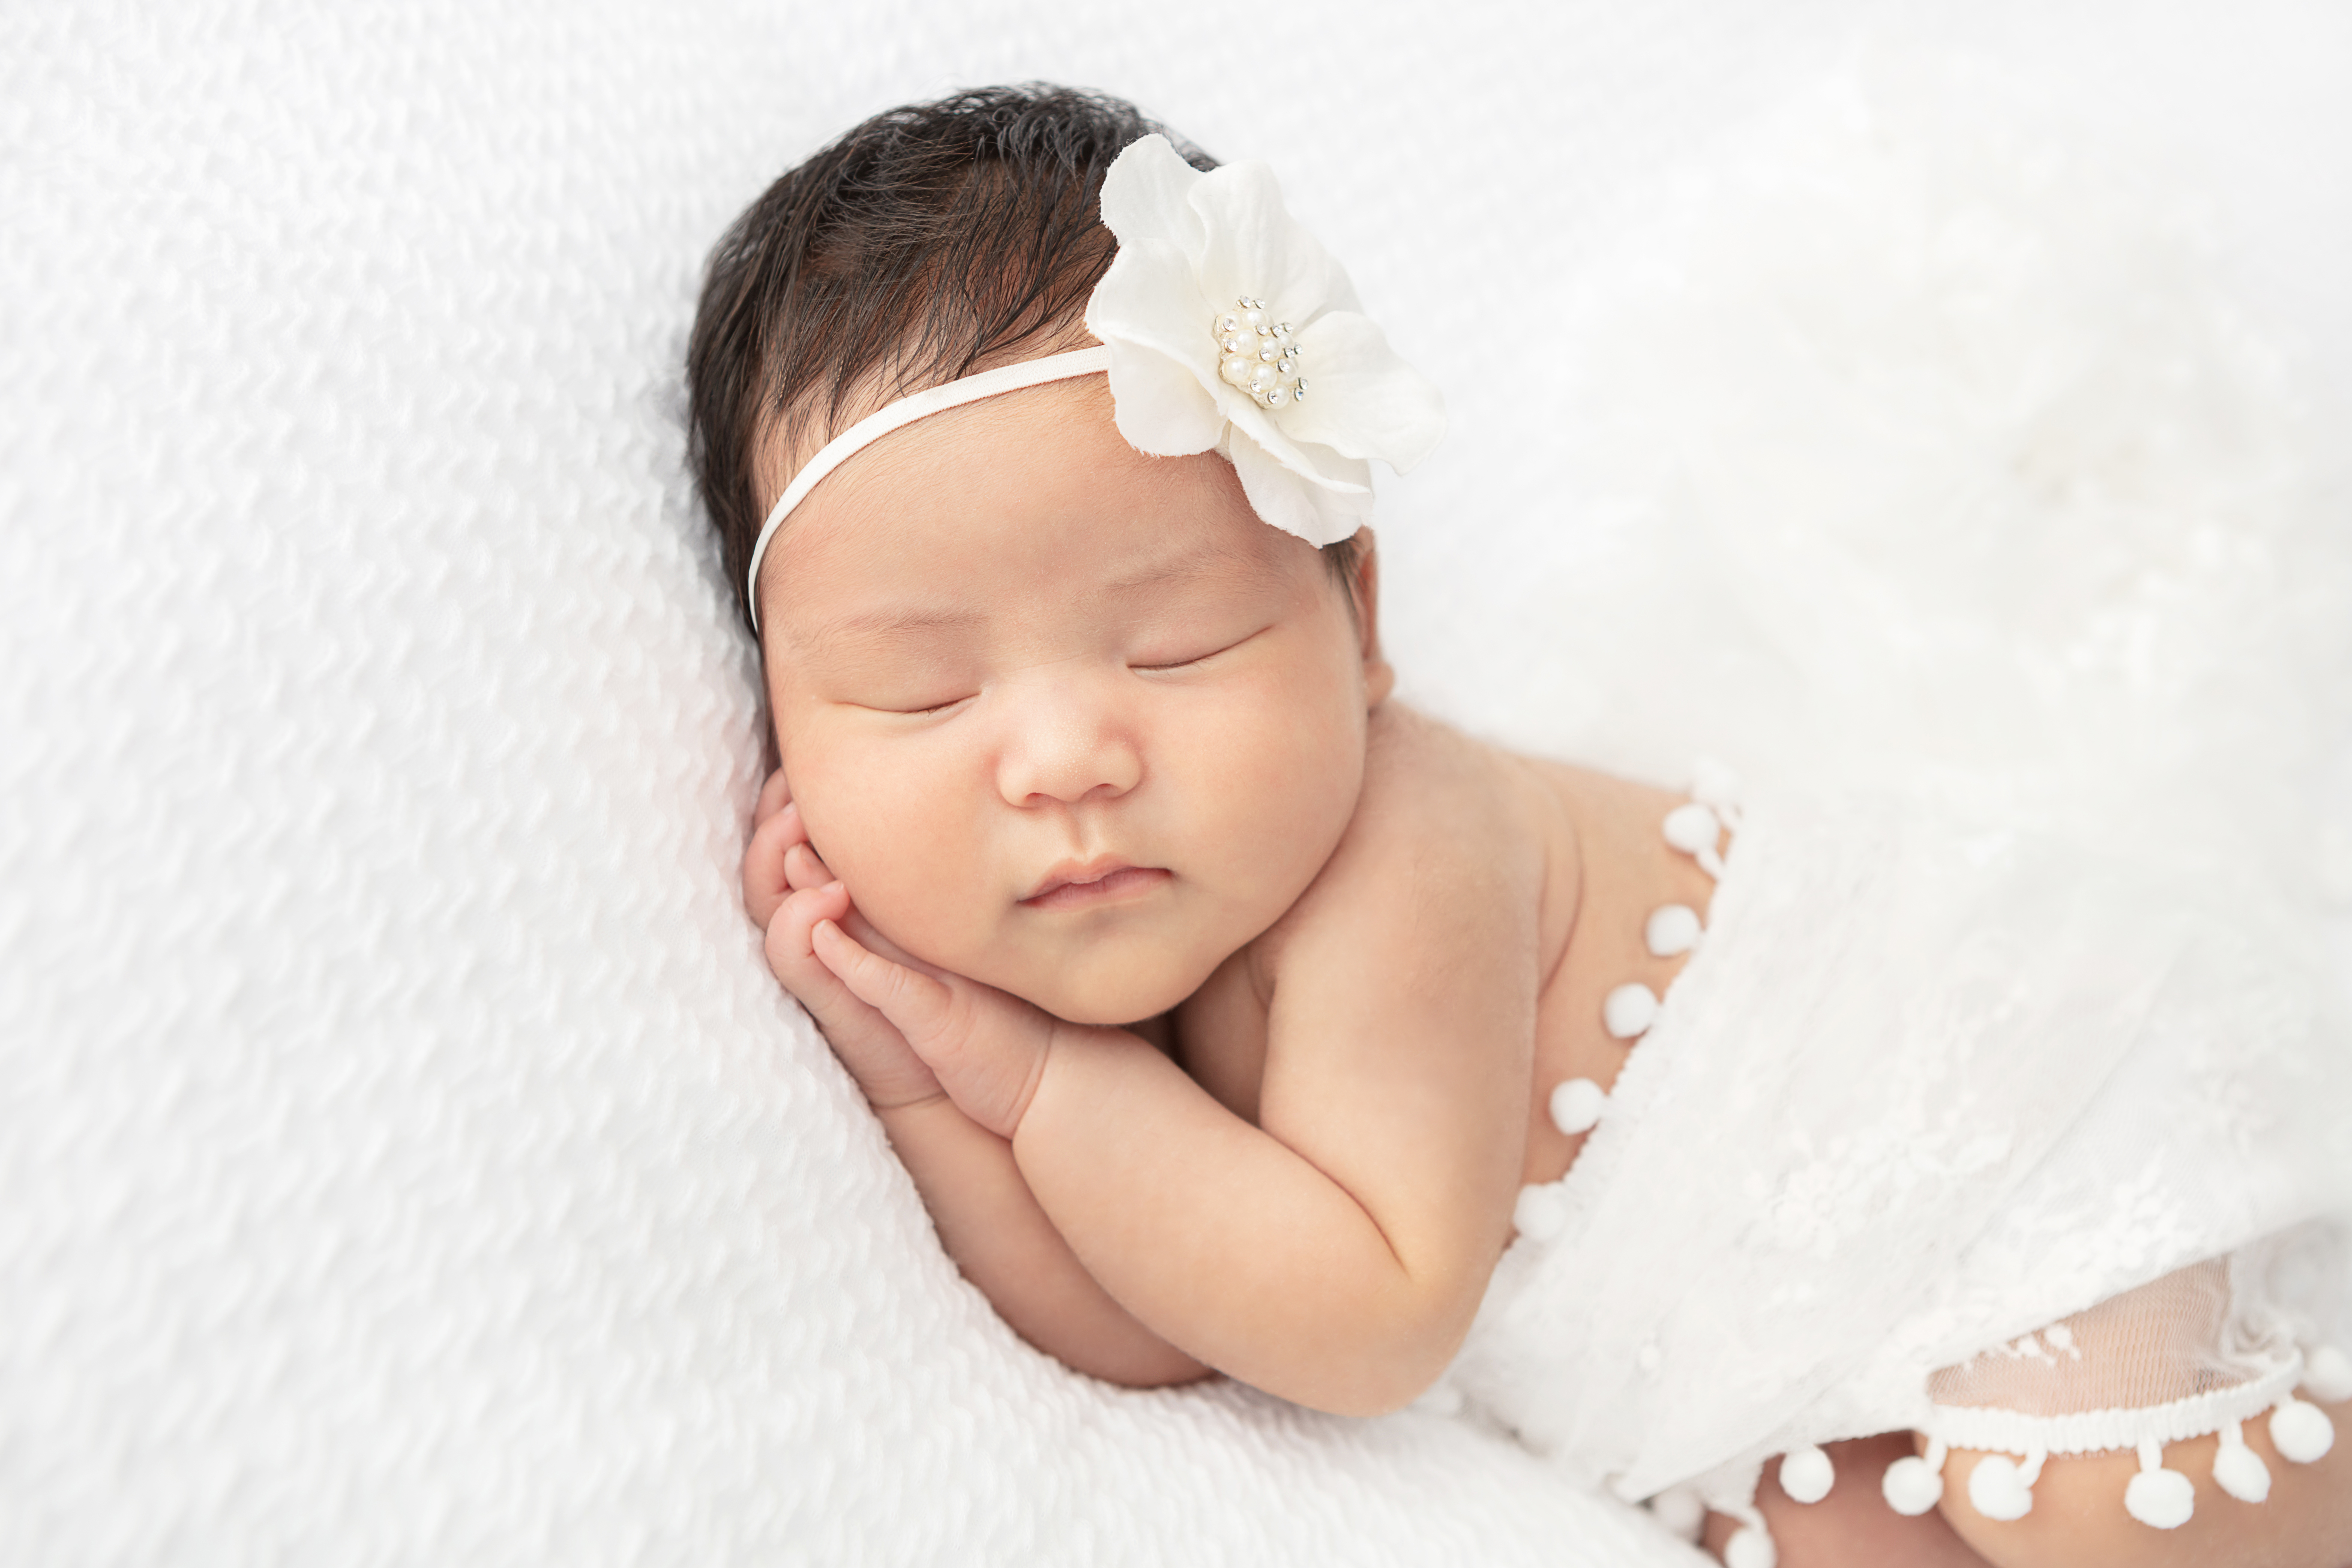 newborn baby girl with dark hair wrapped in a white lace fabric cradled on a soft white fabric withy a white flower headband, hands clasped under her cheek in a sleepy pose